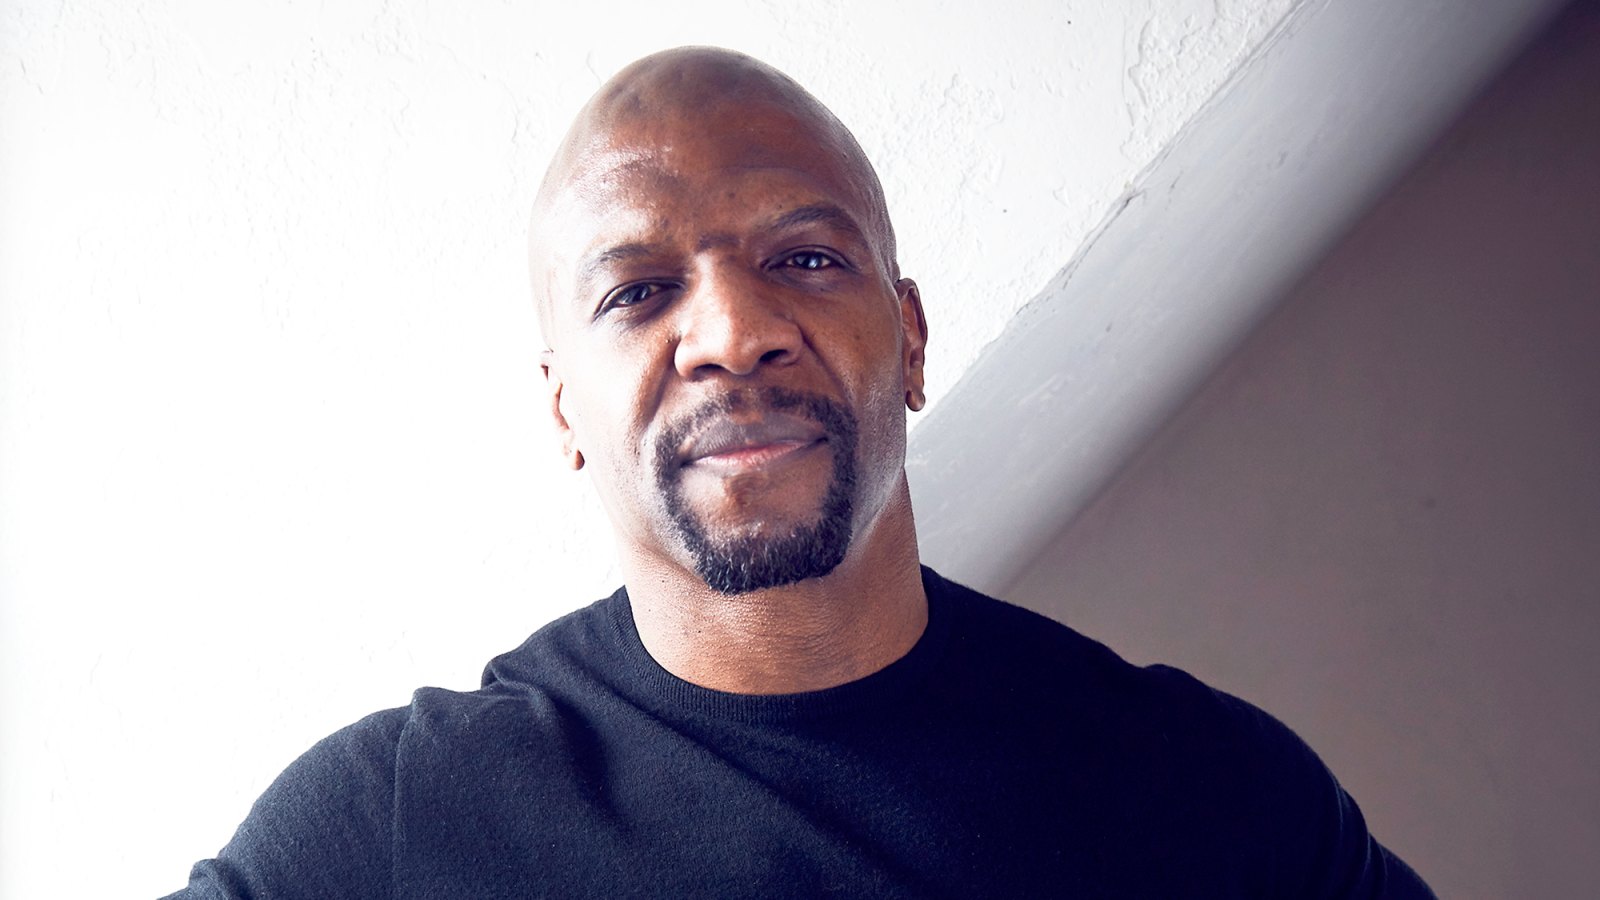 Terry Crews at the YouTube x Getty Images Portrait Studio at 2018 Sundance Film Festival on in Park City, Utah.